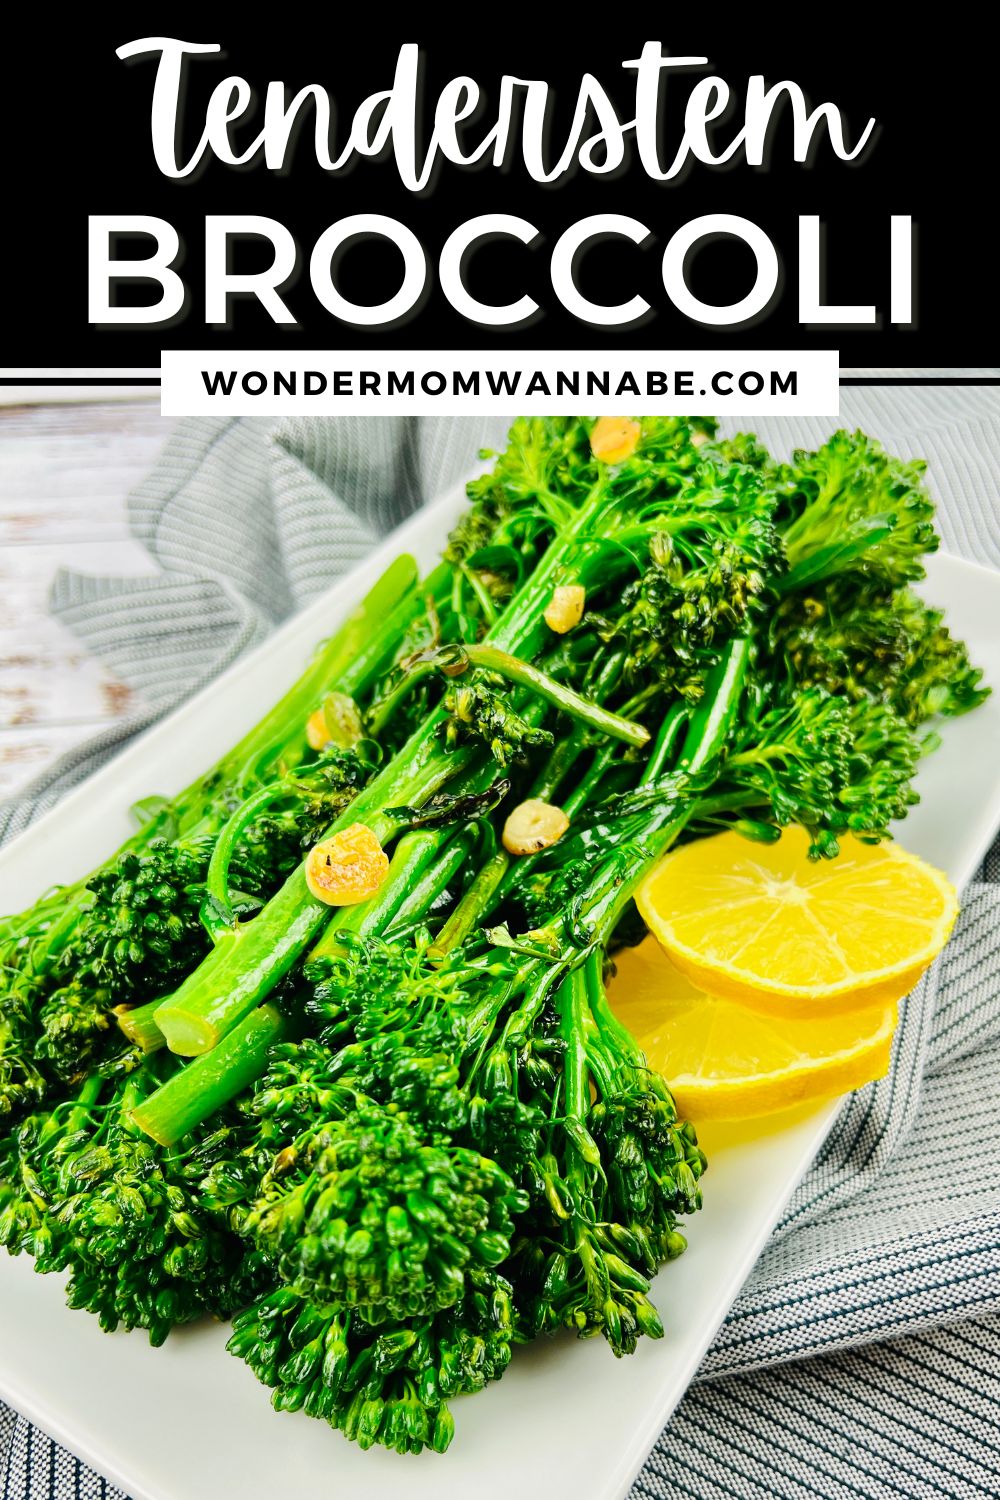 A plate of sautéed Tenderstem Broccoli garnished with lemon slices, with the text "Tenderstem Broccoli" and "wondermomwannabe.com" overlaying the